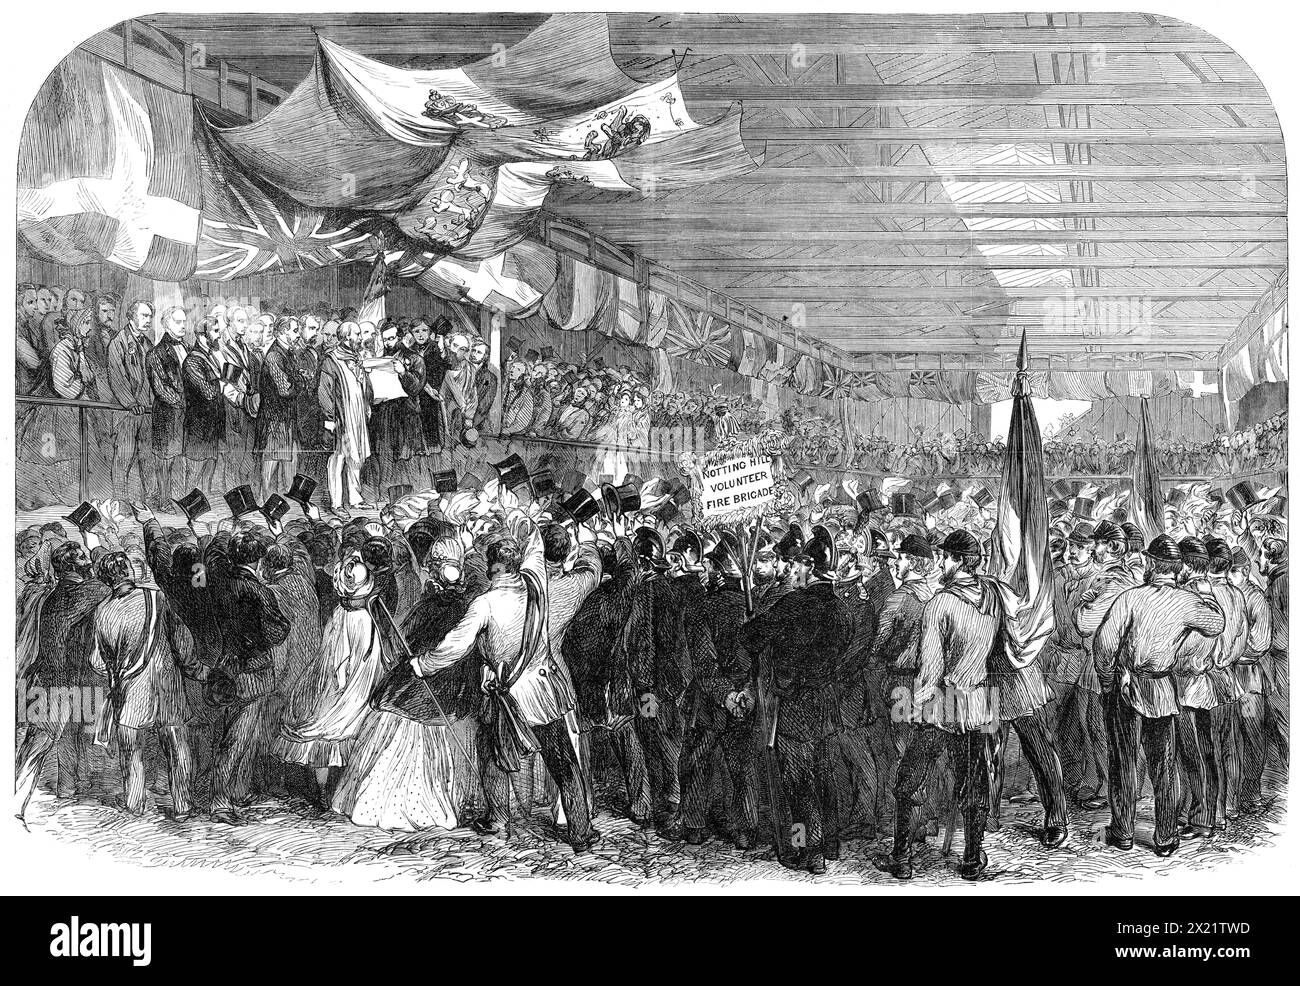 Garibaldi in England: Garibaldi receiving an address at the Nine Elms railway station, 1864. View of '...the interior of the large goods' shed at the Nine Elms station of the London and South-Western Railway, on the afternoon of Monday, the 11th April, when Garibaldi had just arrived from Southampton, and was receiving the addresses of the City Committee, the Working Men's Committee, and the Committee of Italians resident in London'. From &quot;Illustrated London News&quot;, 1864. Stock Photo